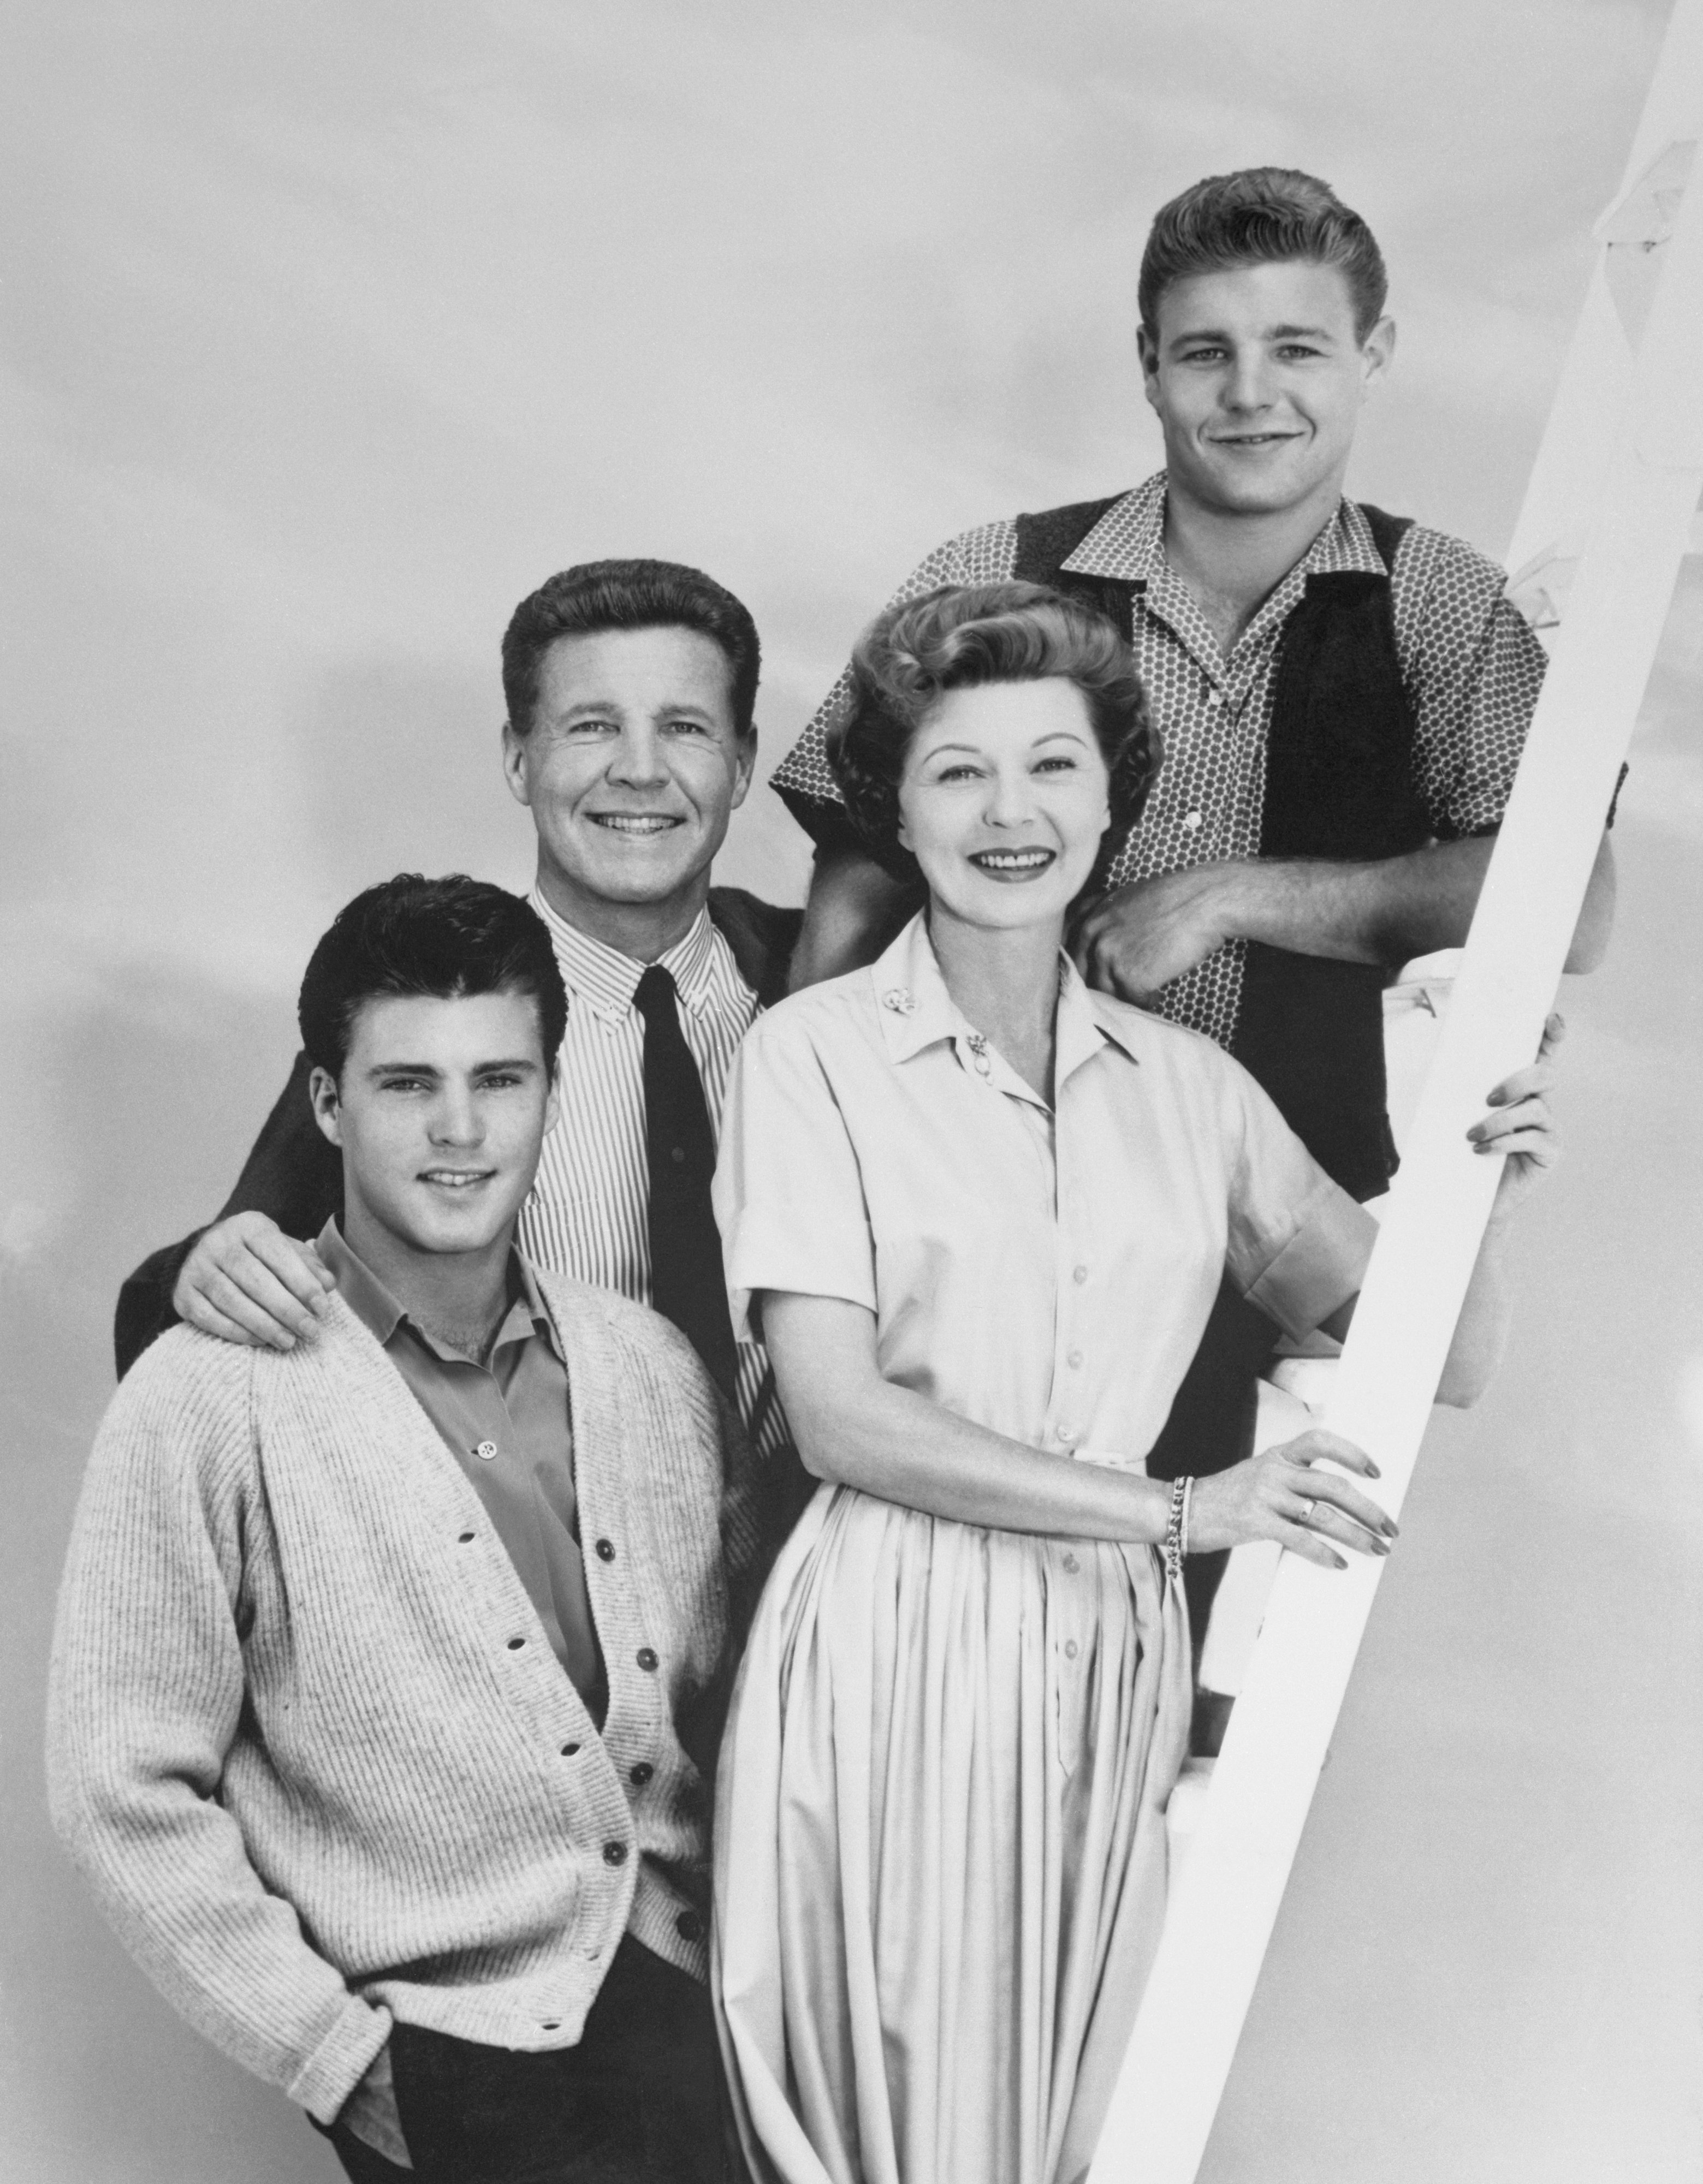 The Nelson family portrait for their show, The Adventures of Ozzie and Harriet, 1952-1964. | Source: Getty Images